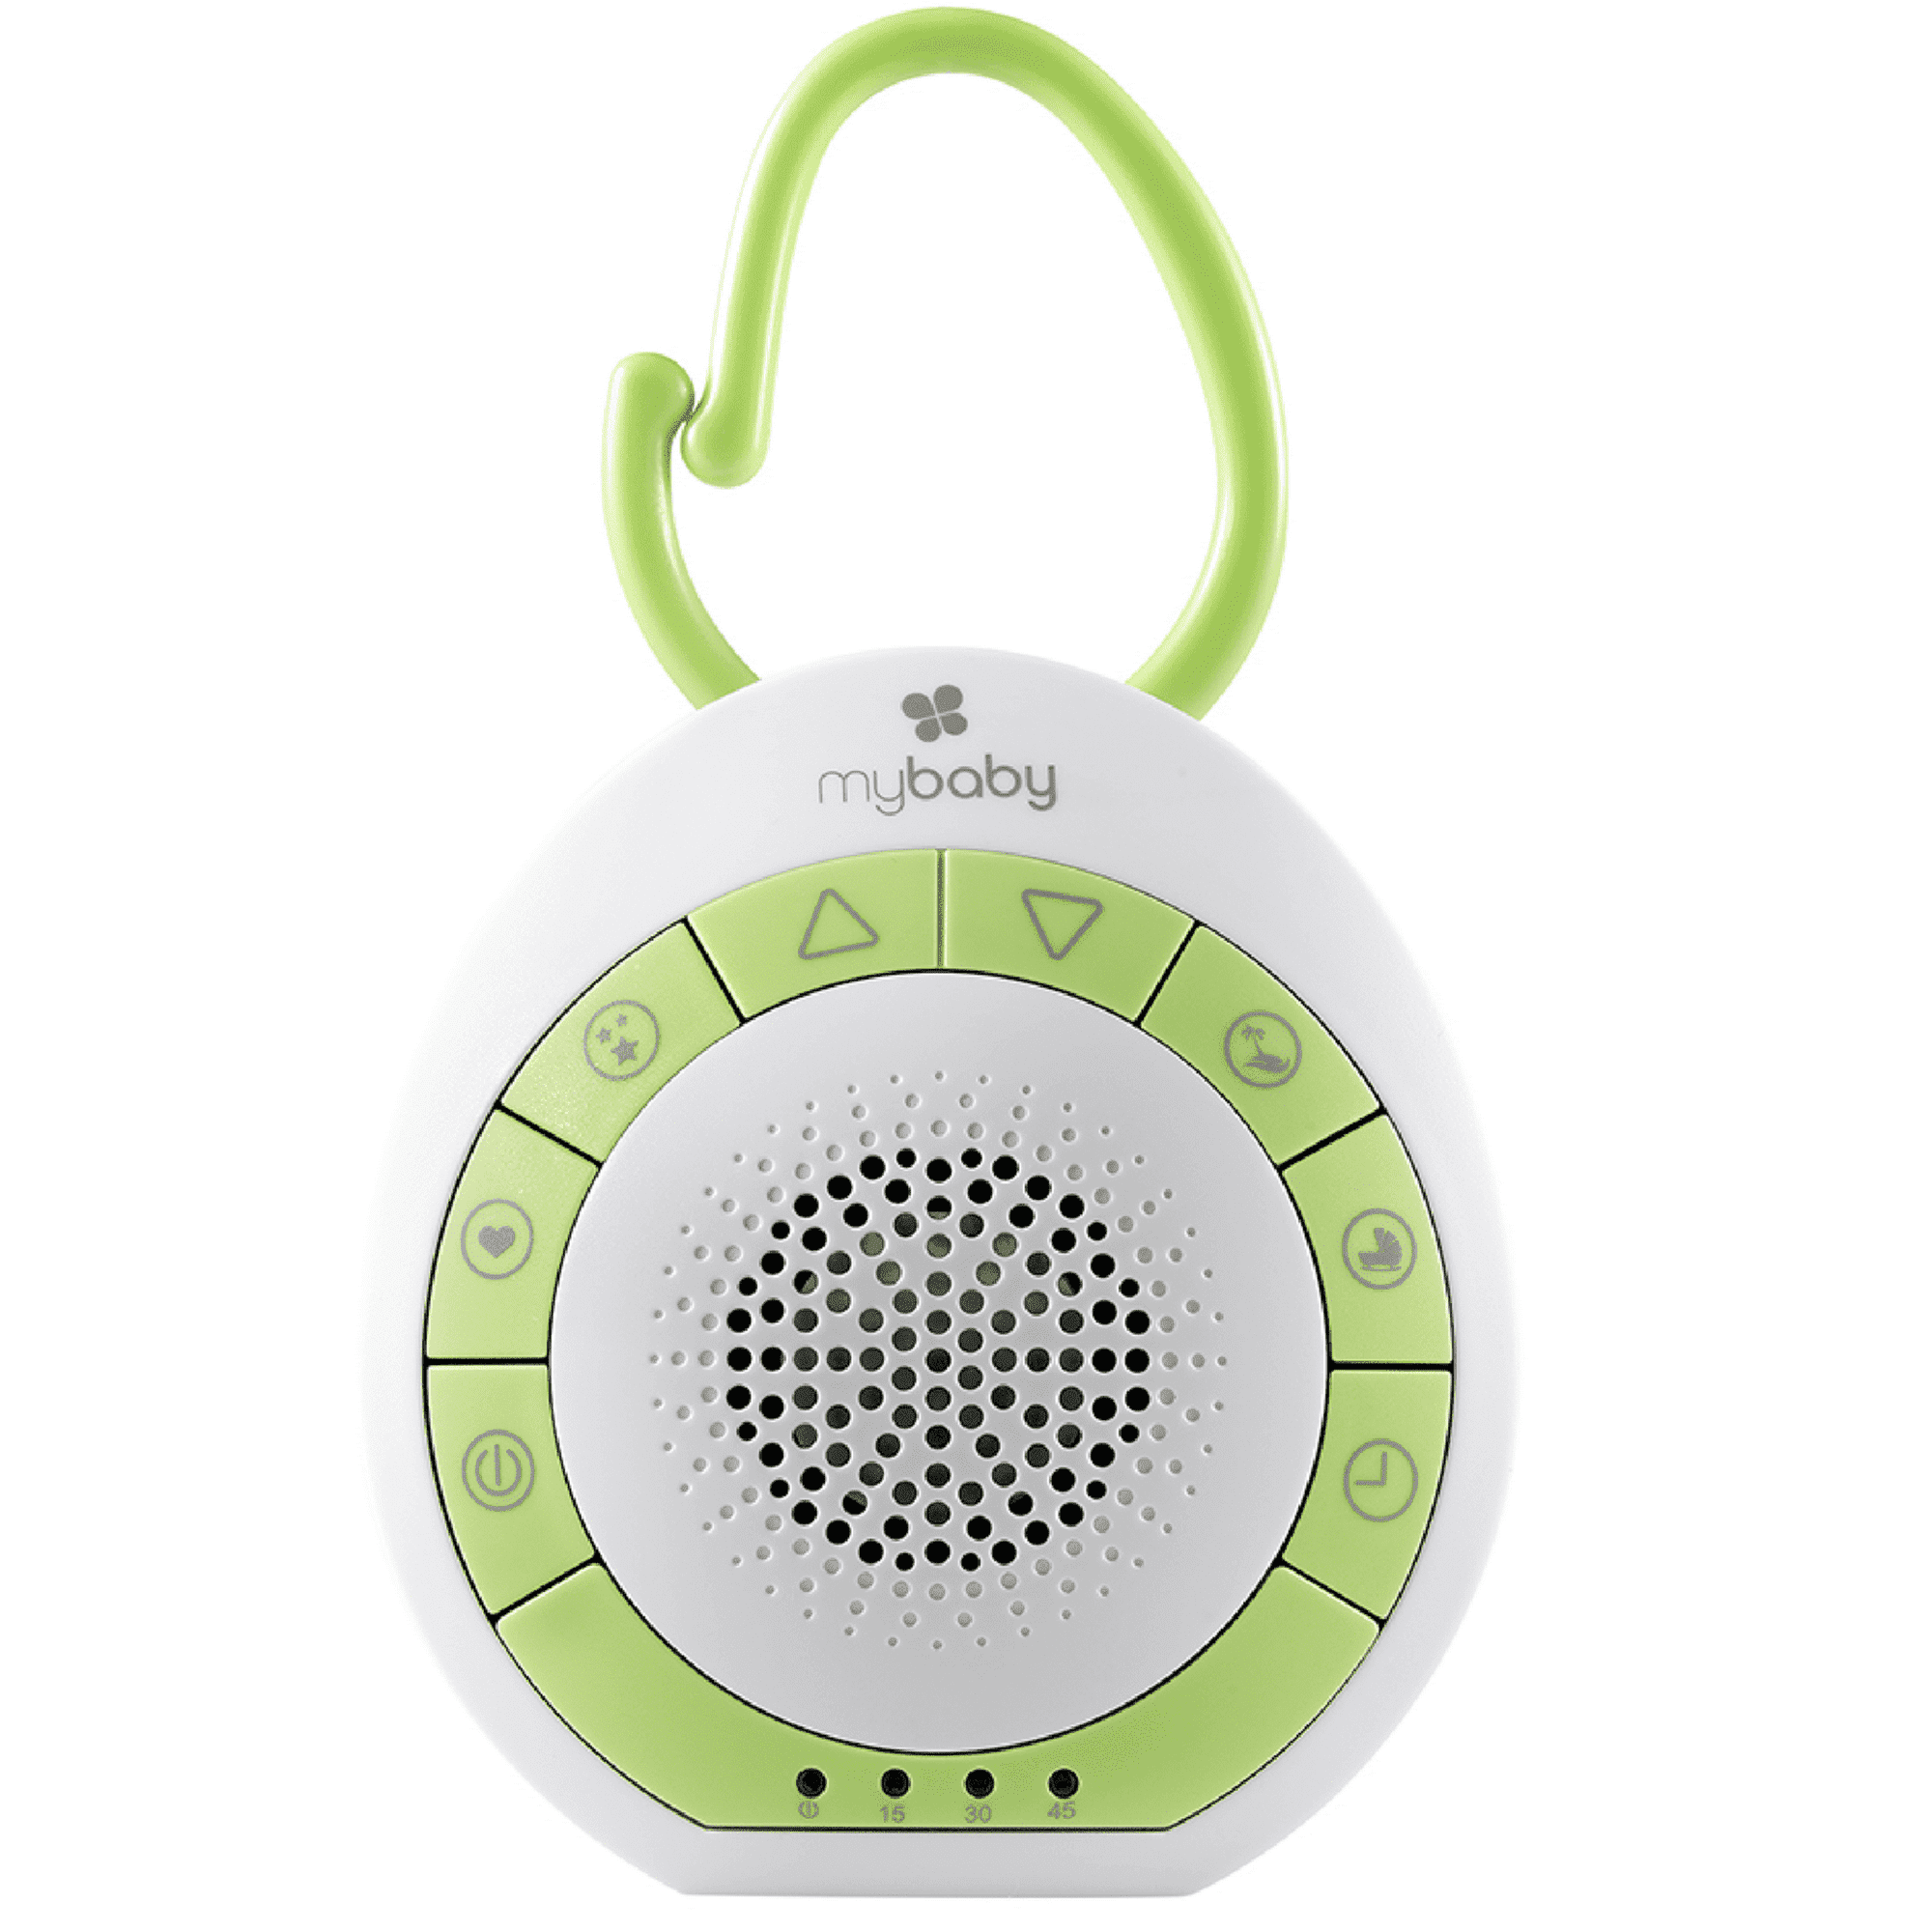 Dreams Soother Remote, with Einstein Baby Sleep Multicolor Baby Machine Sea Sound